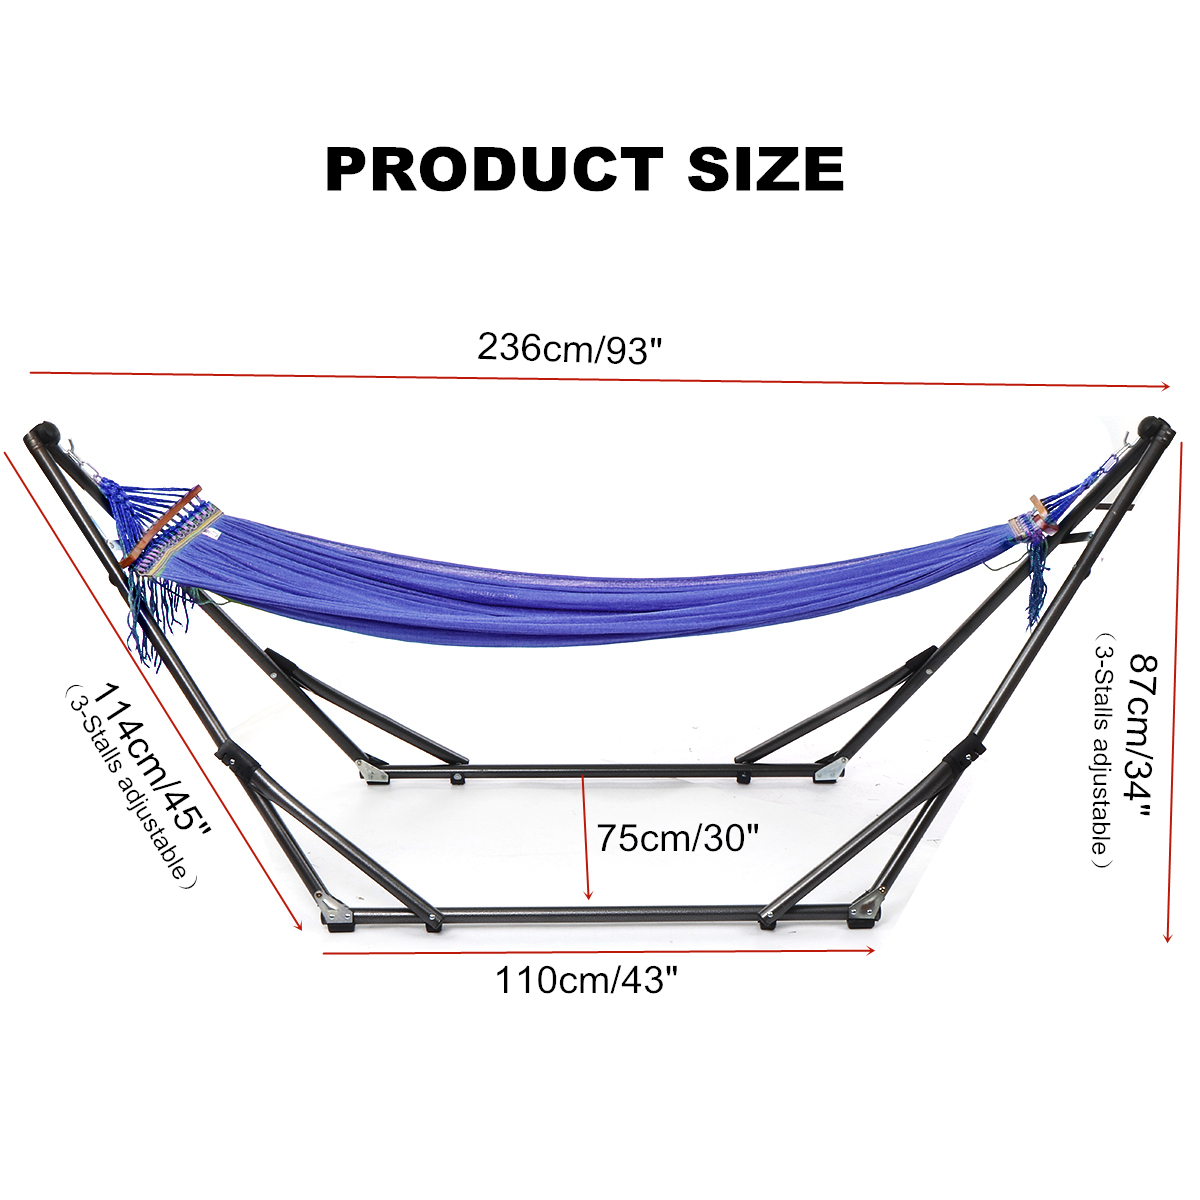 Portable Canvas Hammock Stand Portable Multifunctional Practical Outdoor Garden Swing Hammock Single Hanging Chair Bed Leisure Camping Travel 17